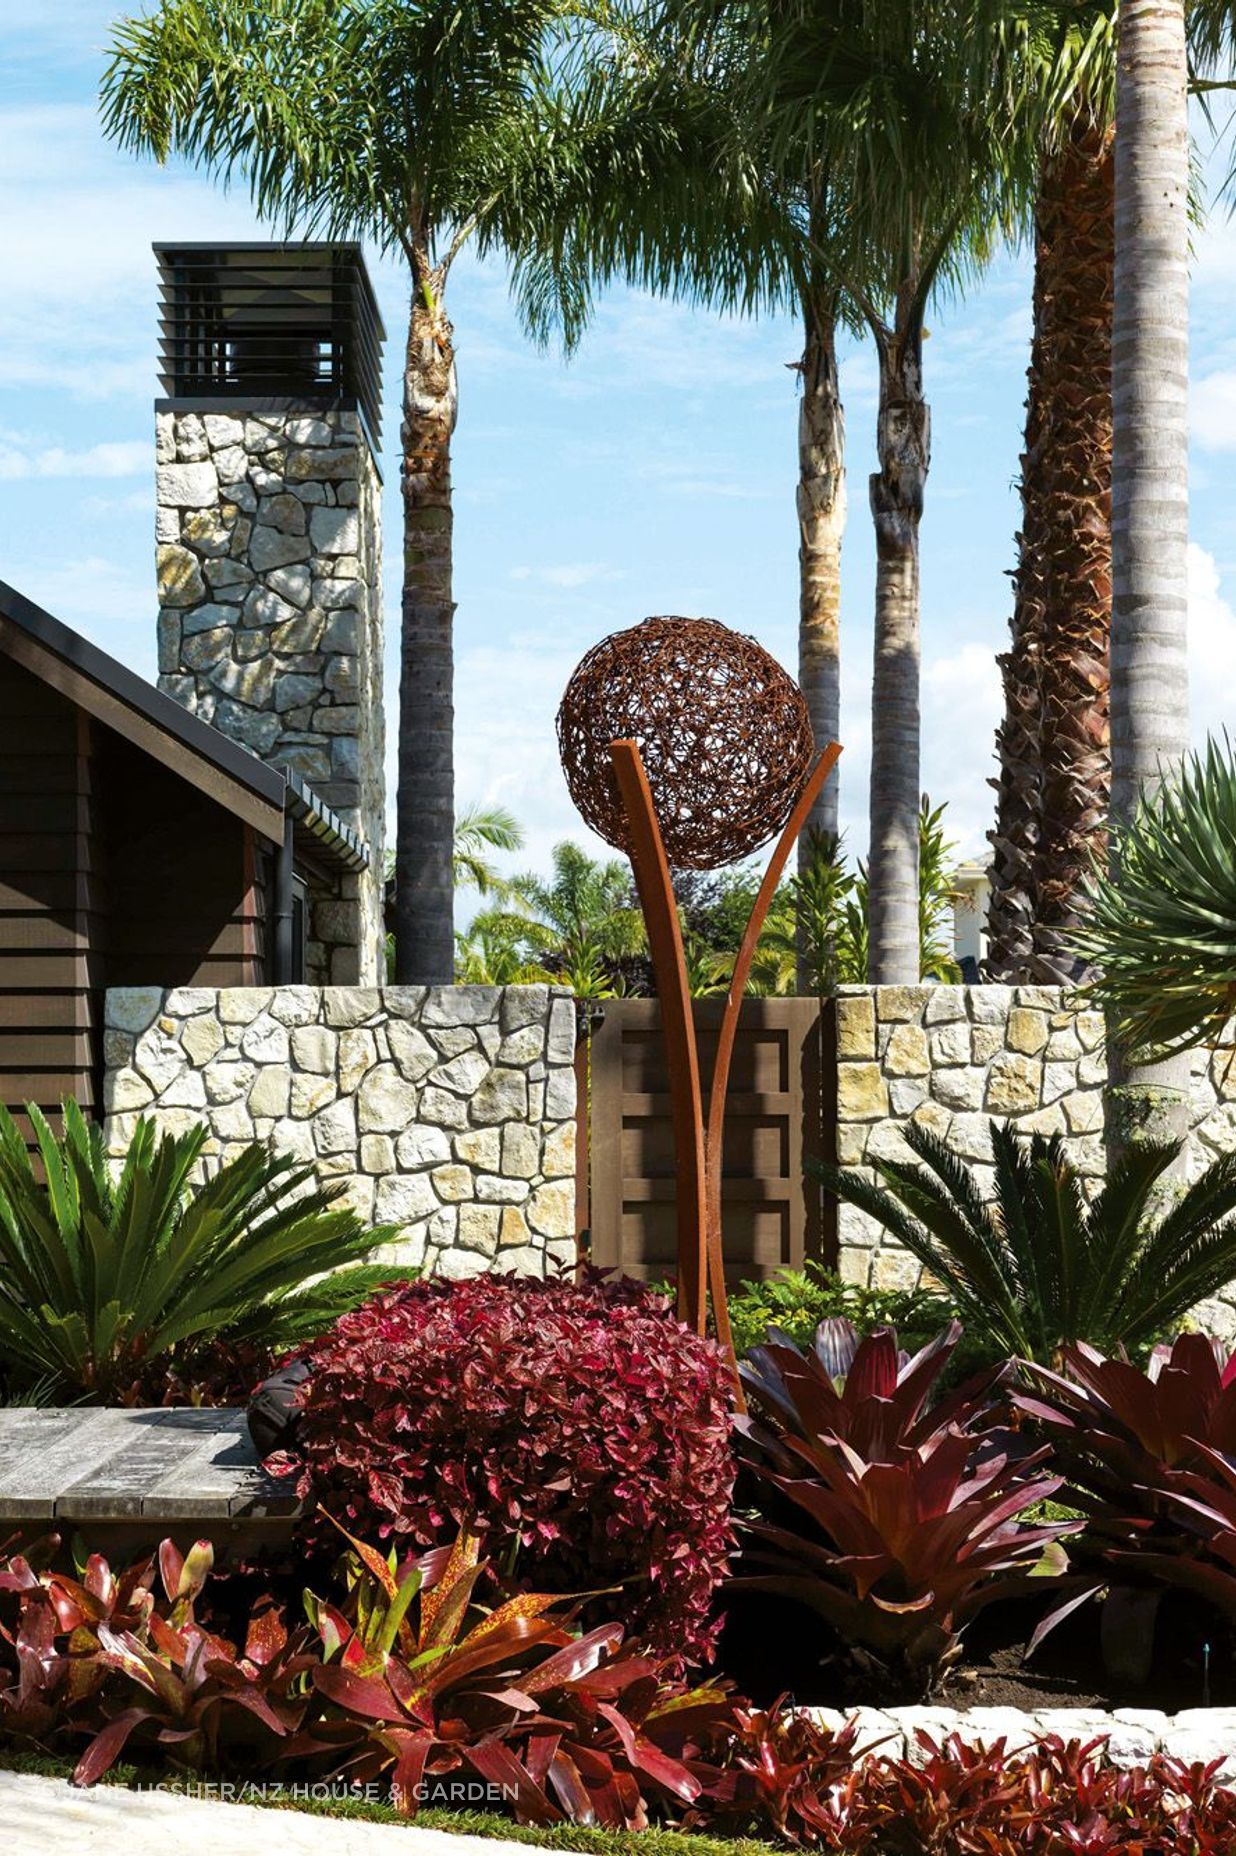 A boardwalk adds to the resort-like feel of the entrance, with planting that includes cycads, iresine and bromeliads; the sculpture is by Wire Art – the couple spotted a similar one at a Wānaka vineyard.